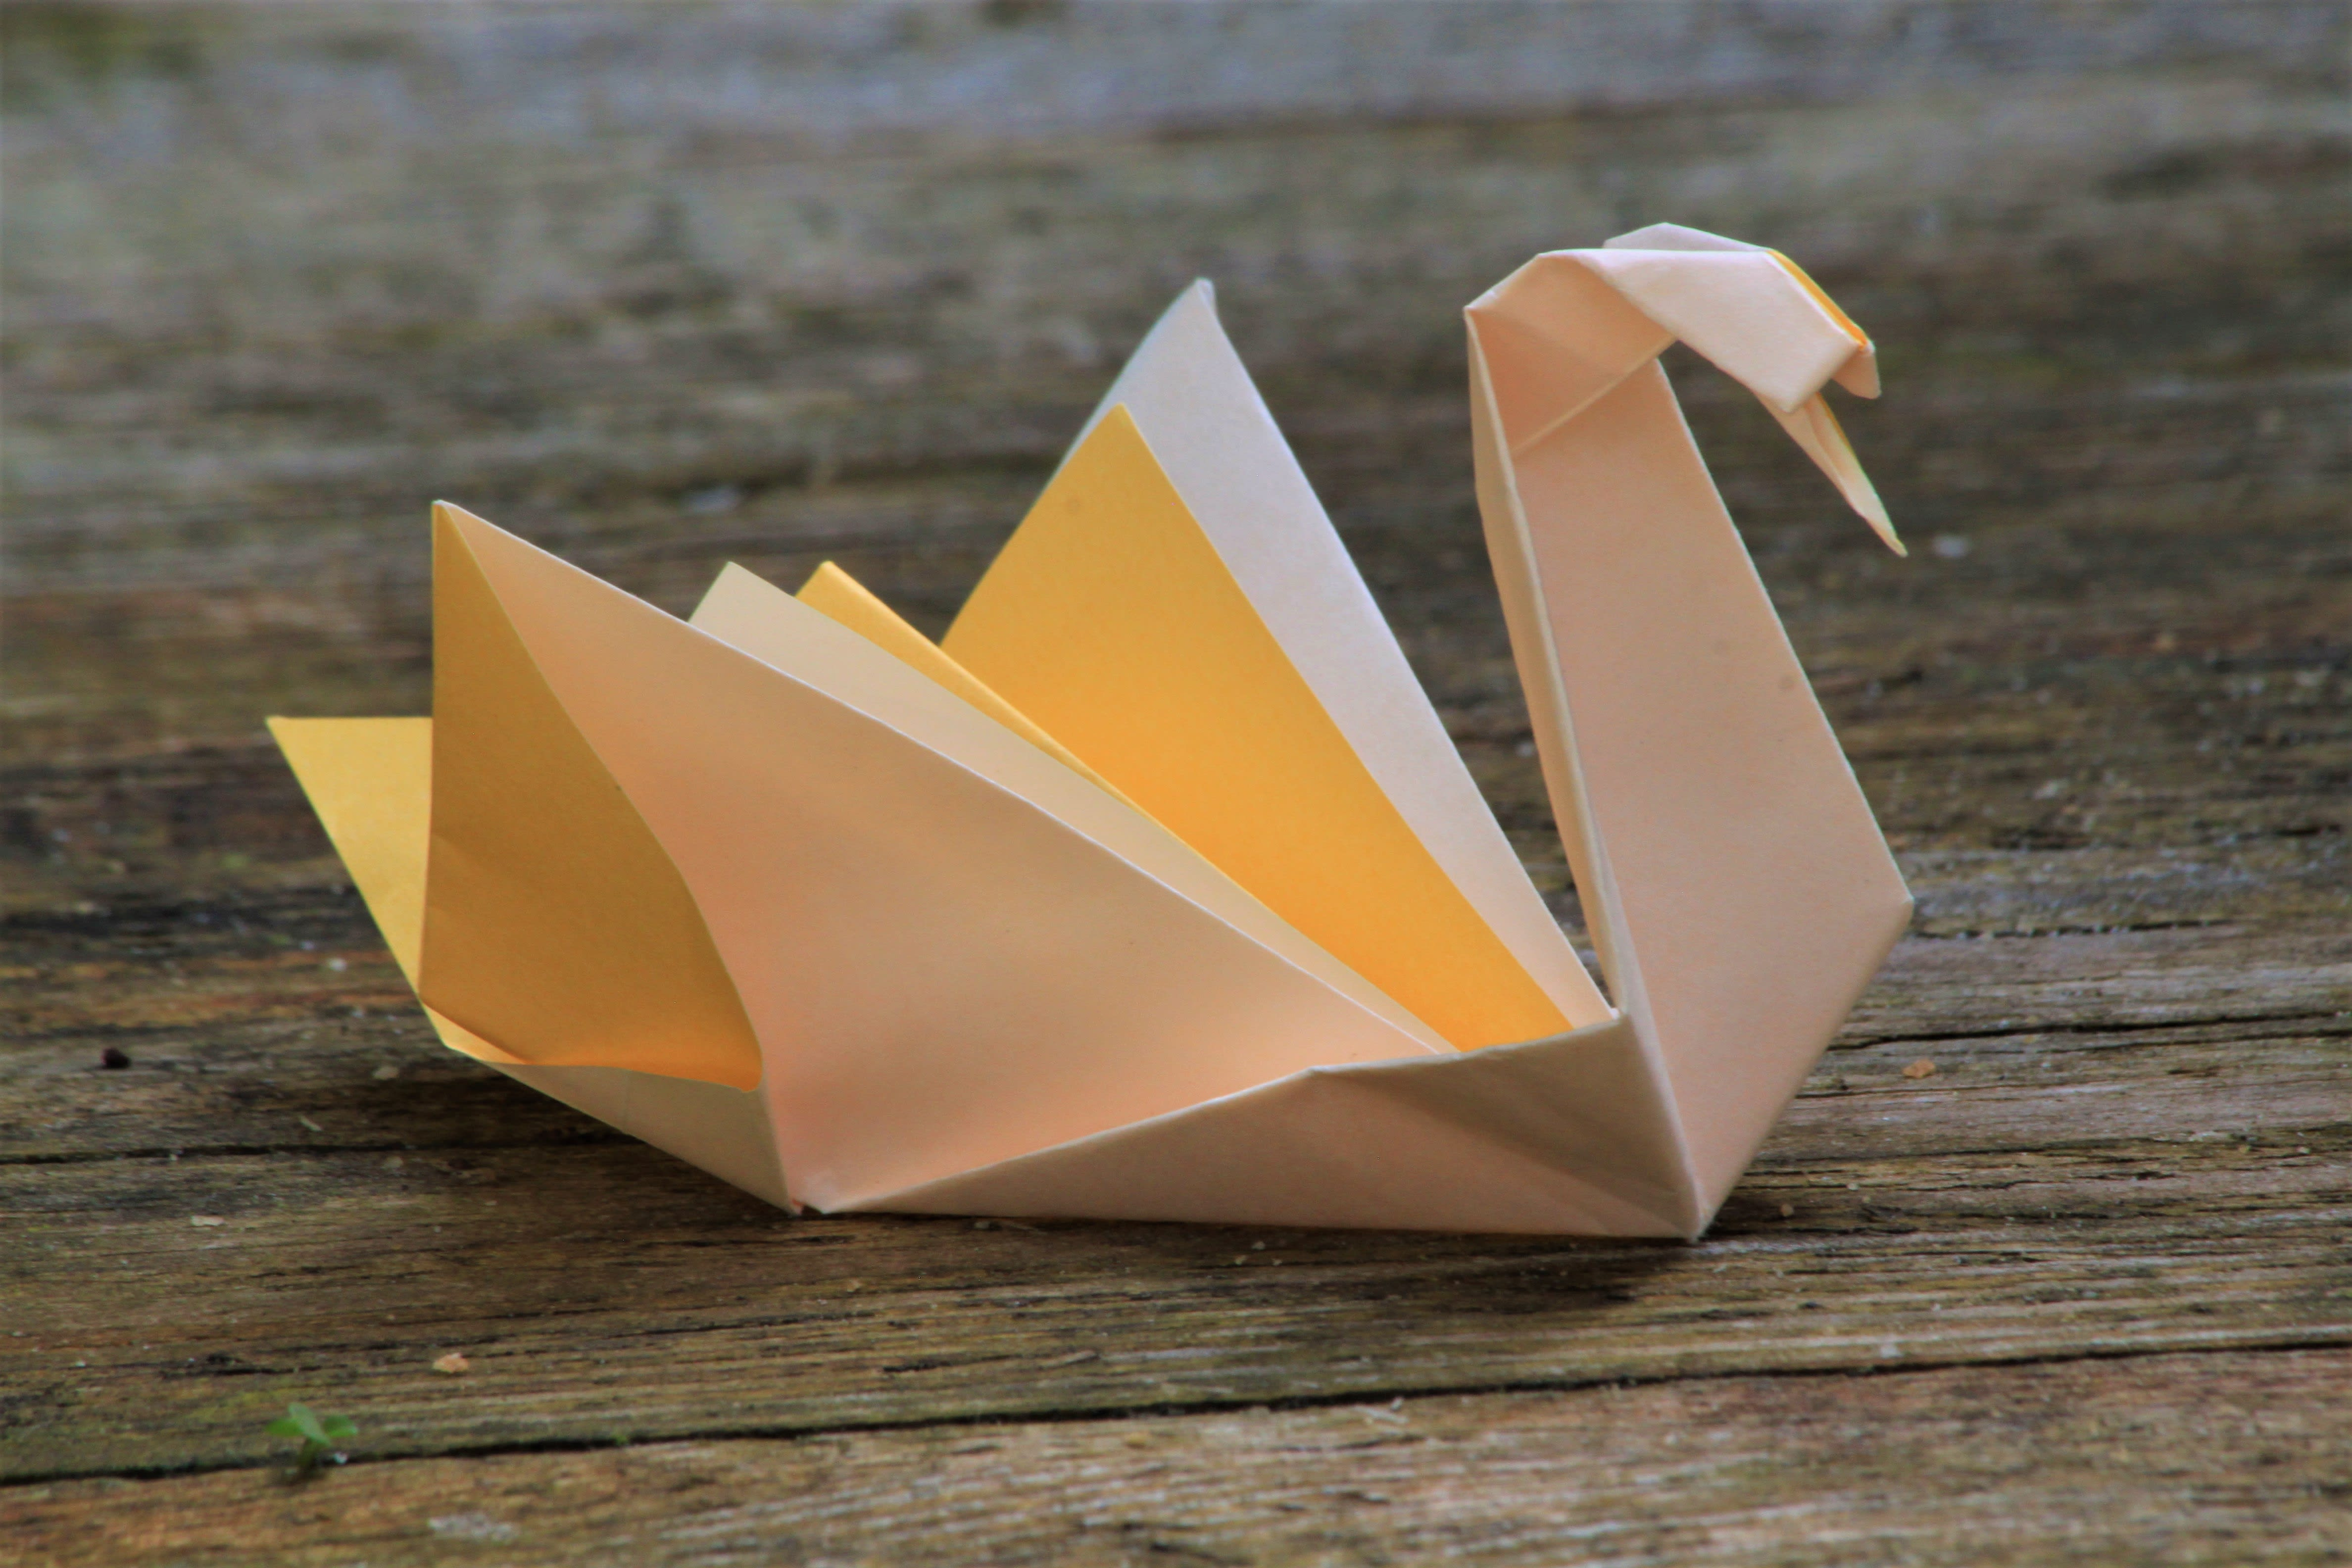 How To Make Origami Swans Fold And Send Origami Swans For Wedding Gifts